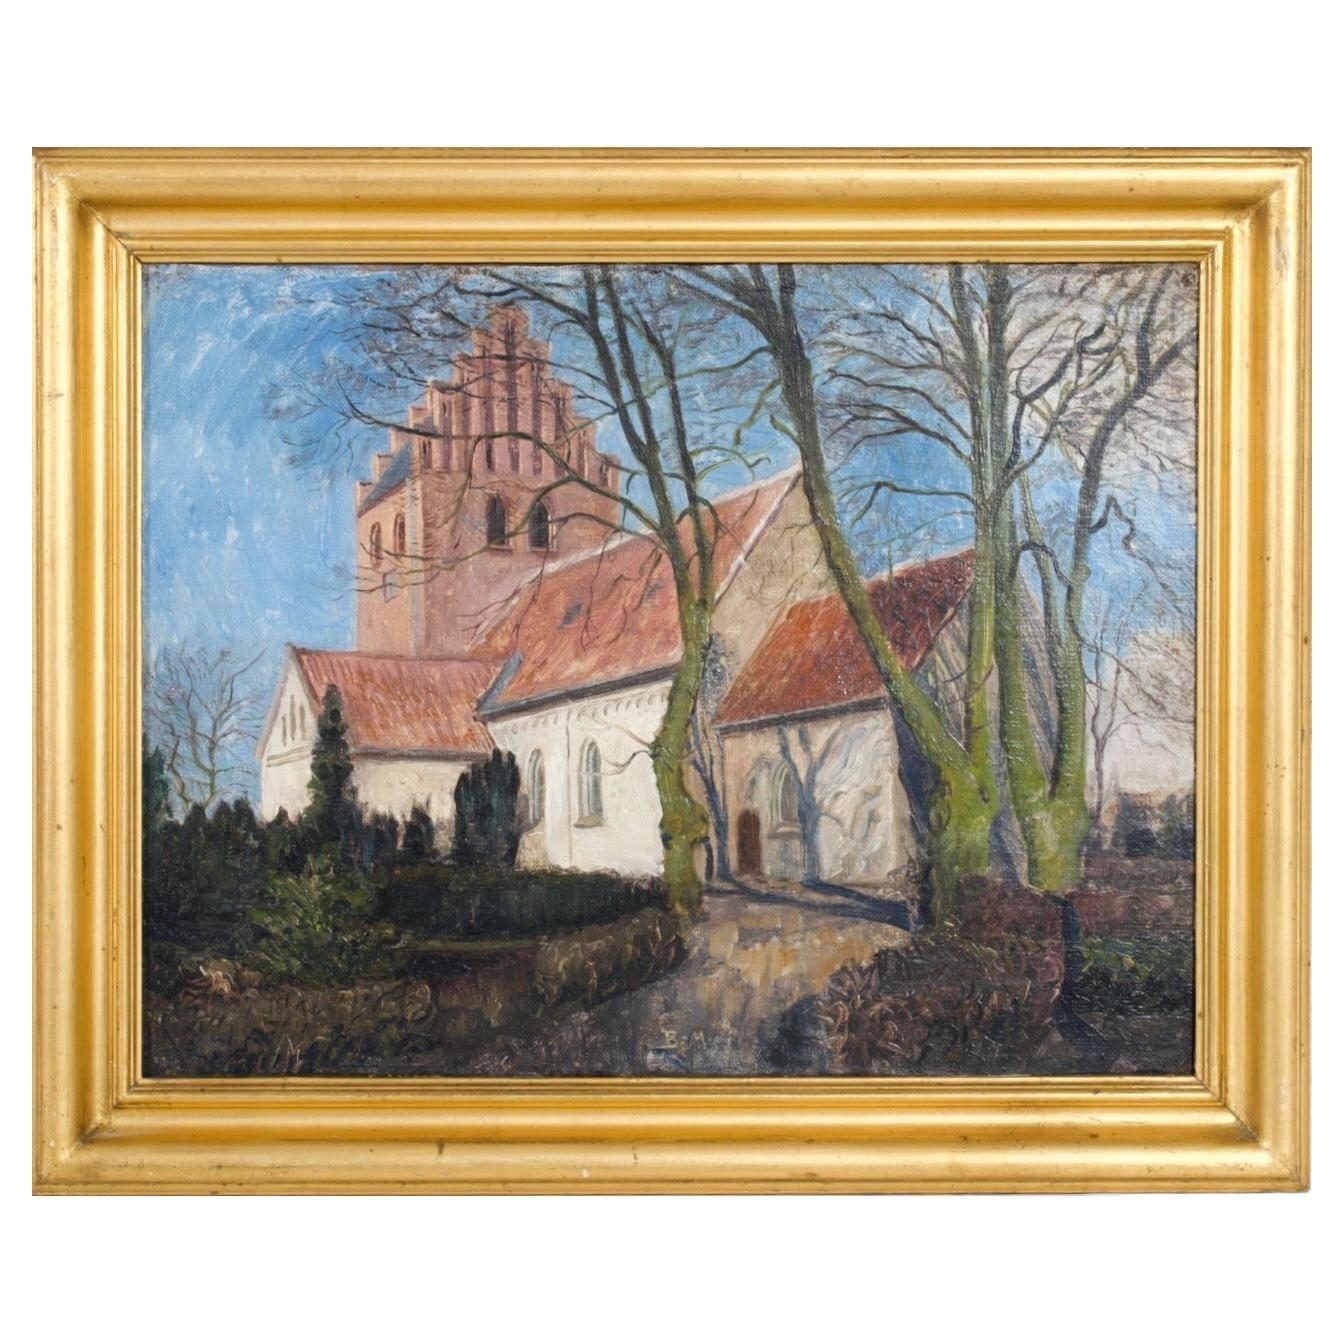 Danish oil painting, signed “BM” circa 100 years old. For Sale